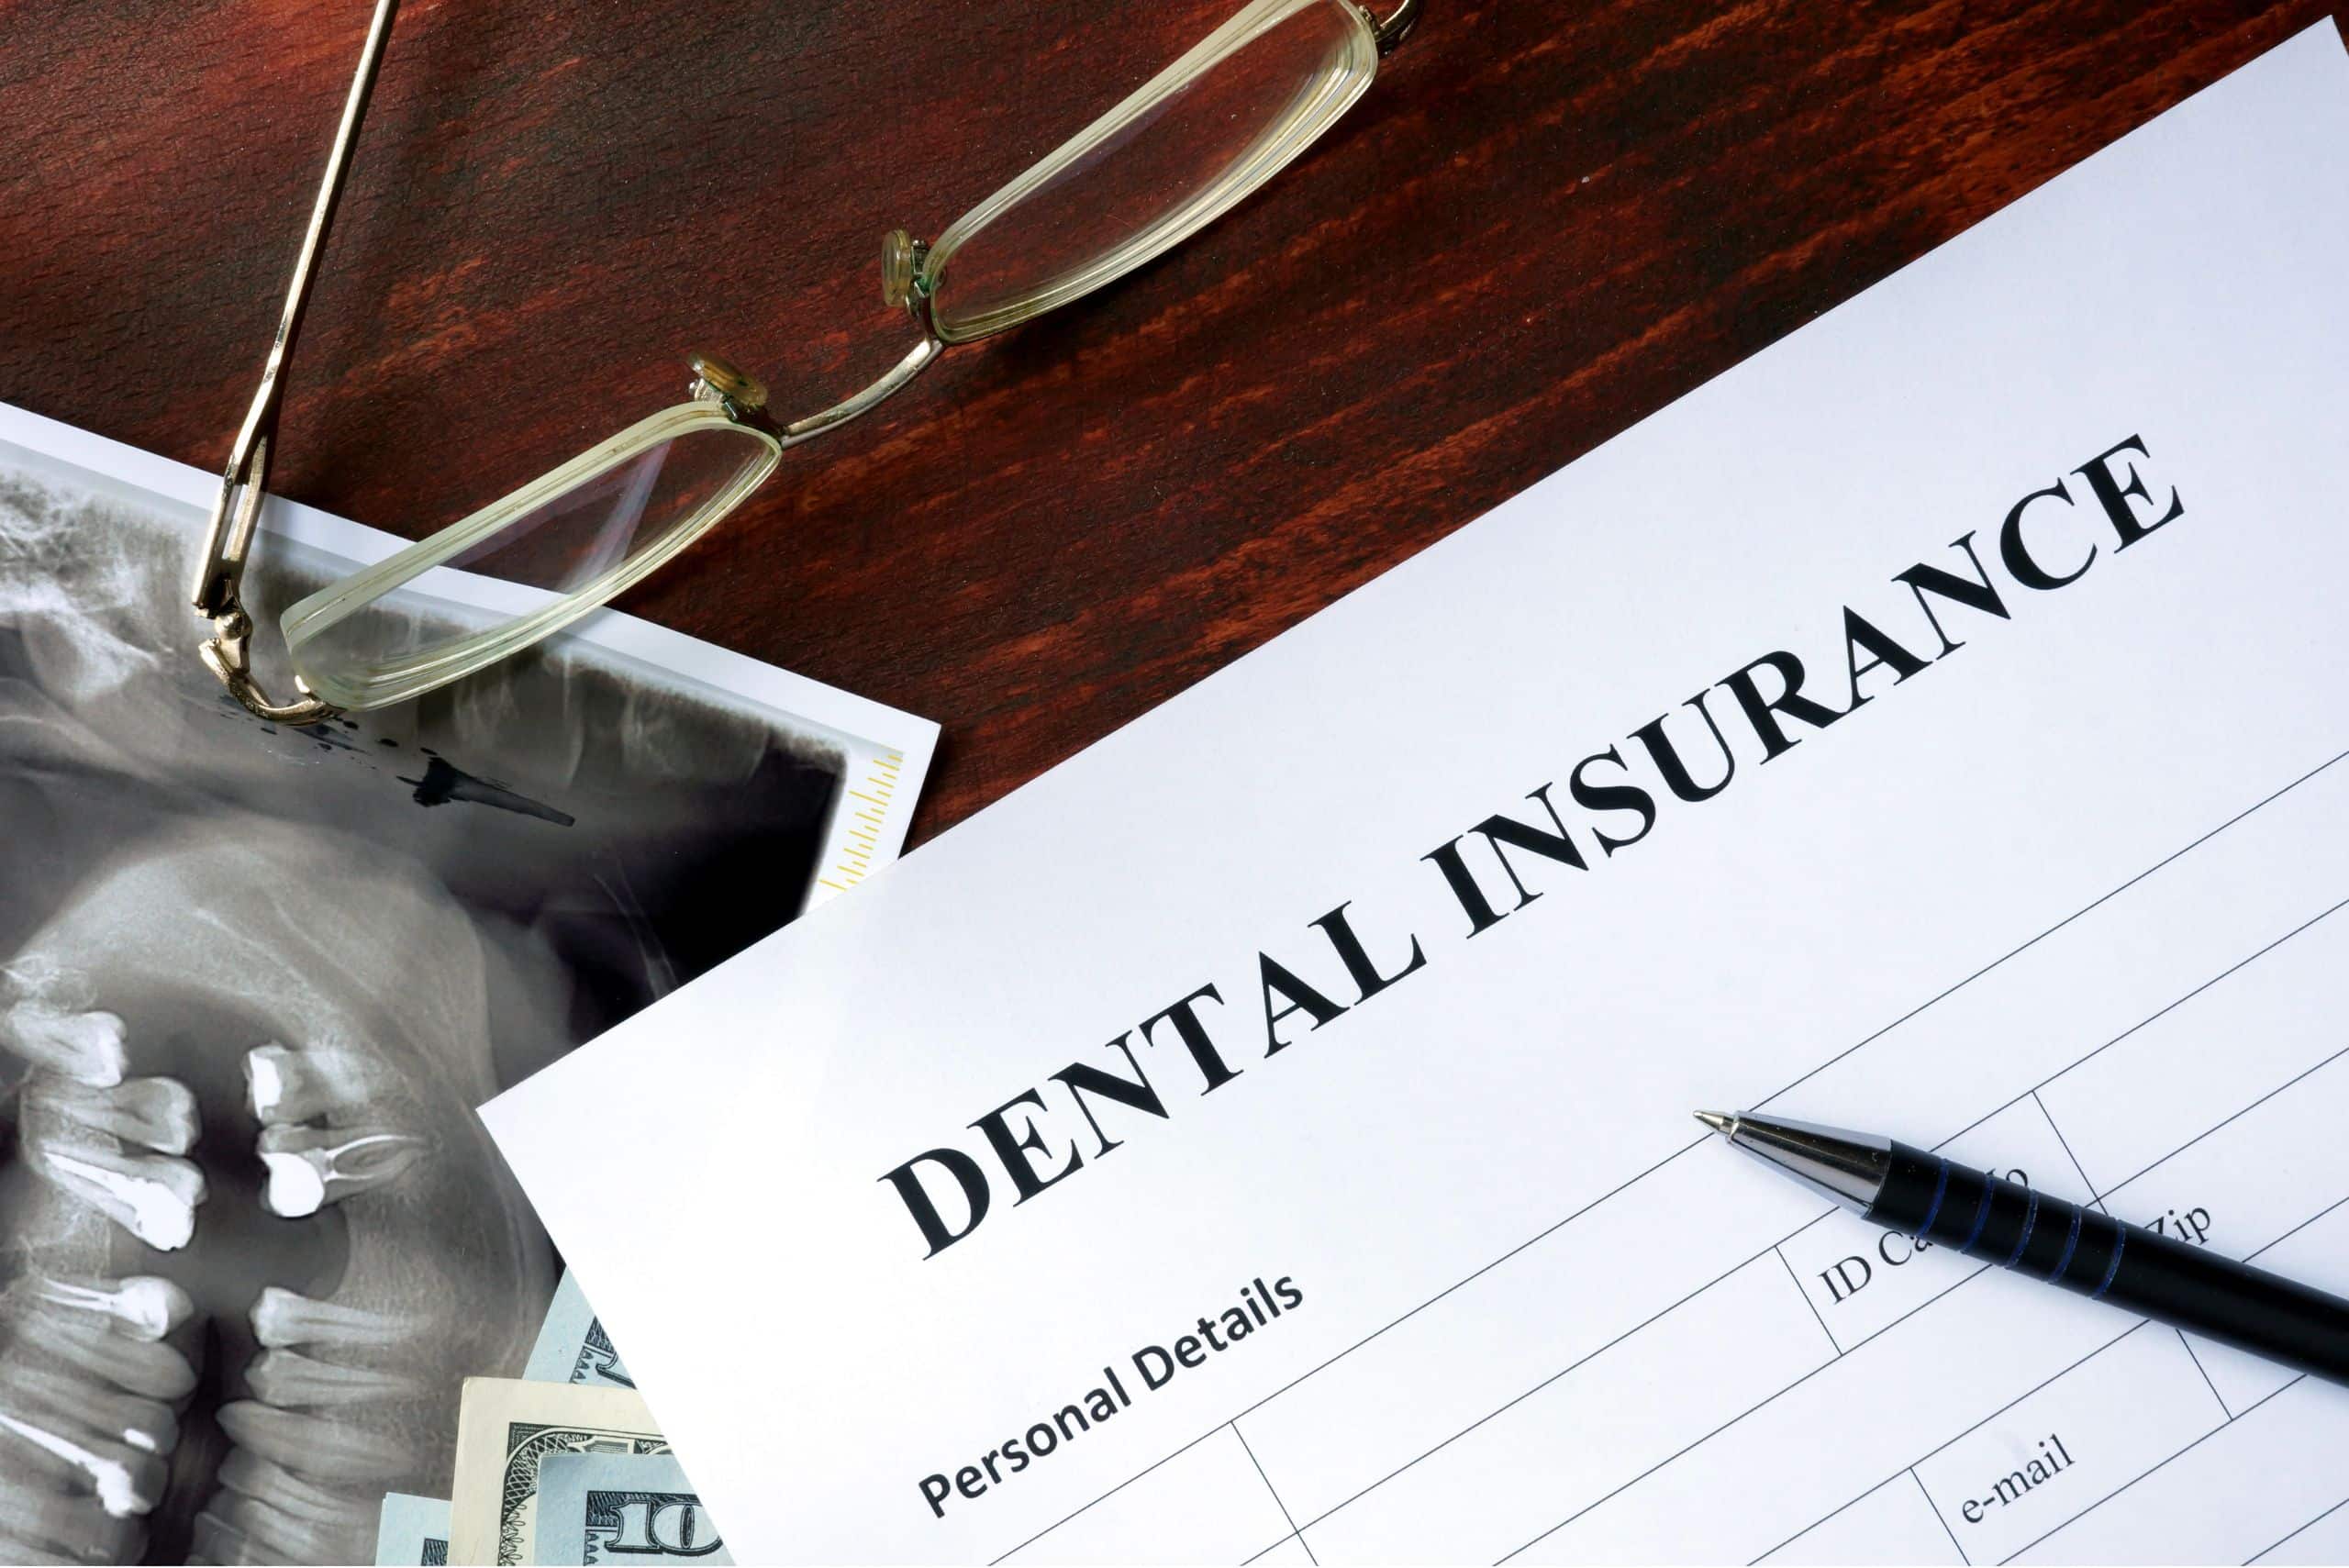 Dental insurance form in wooden table